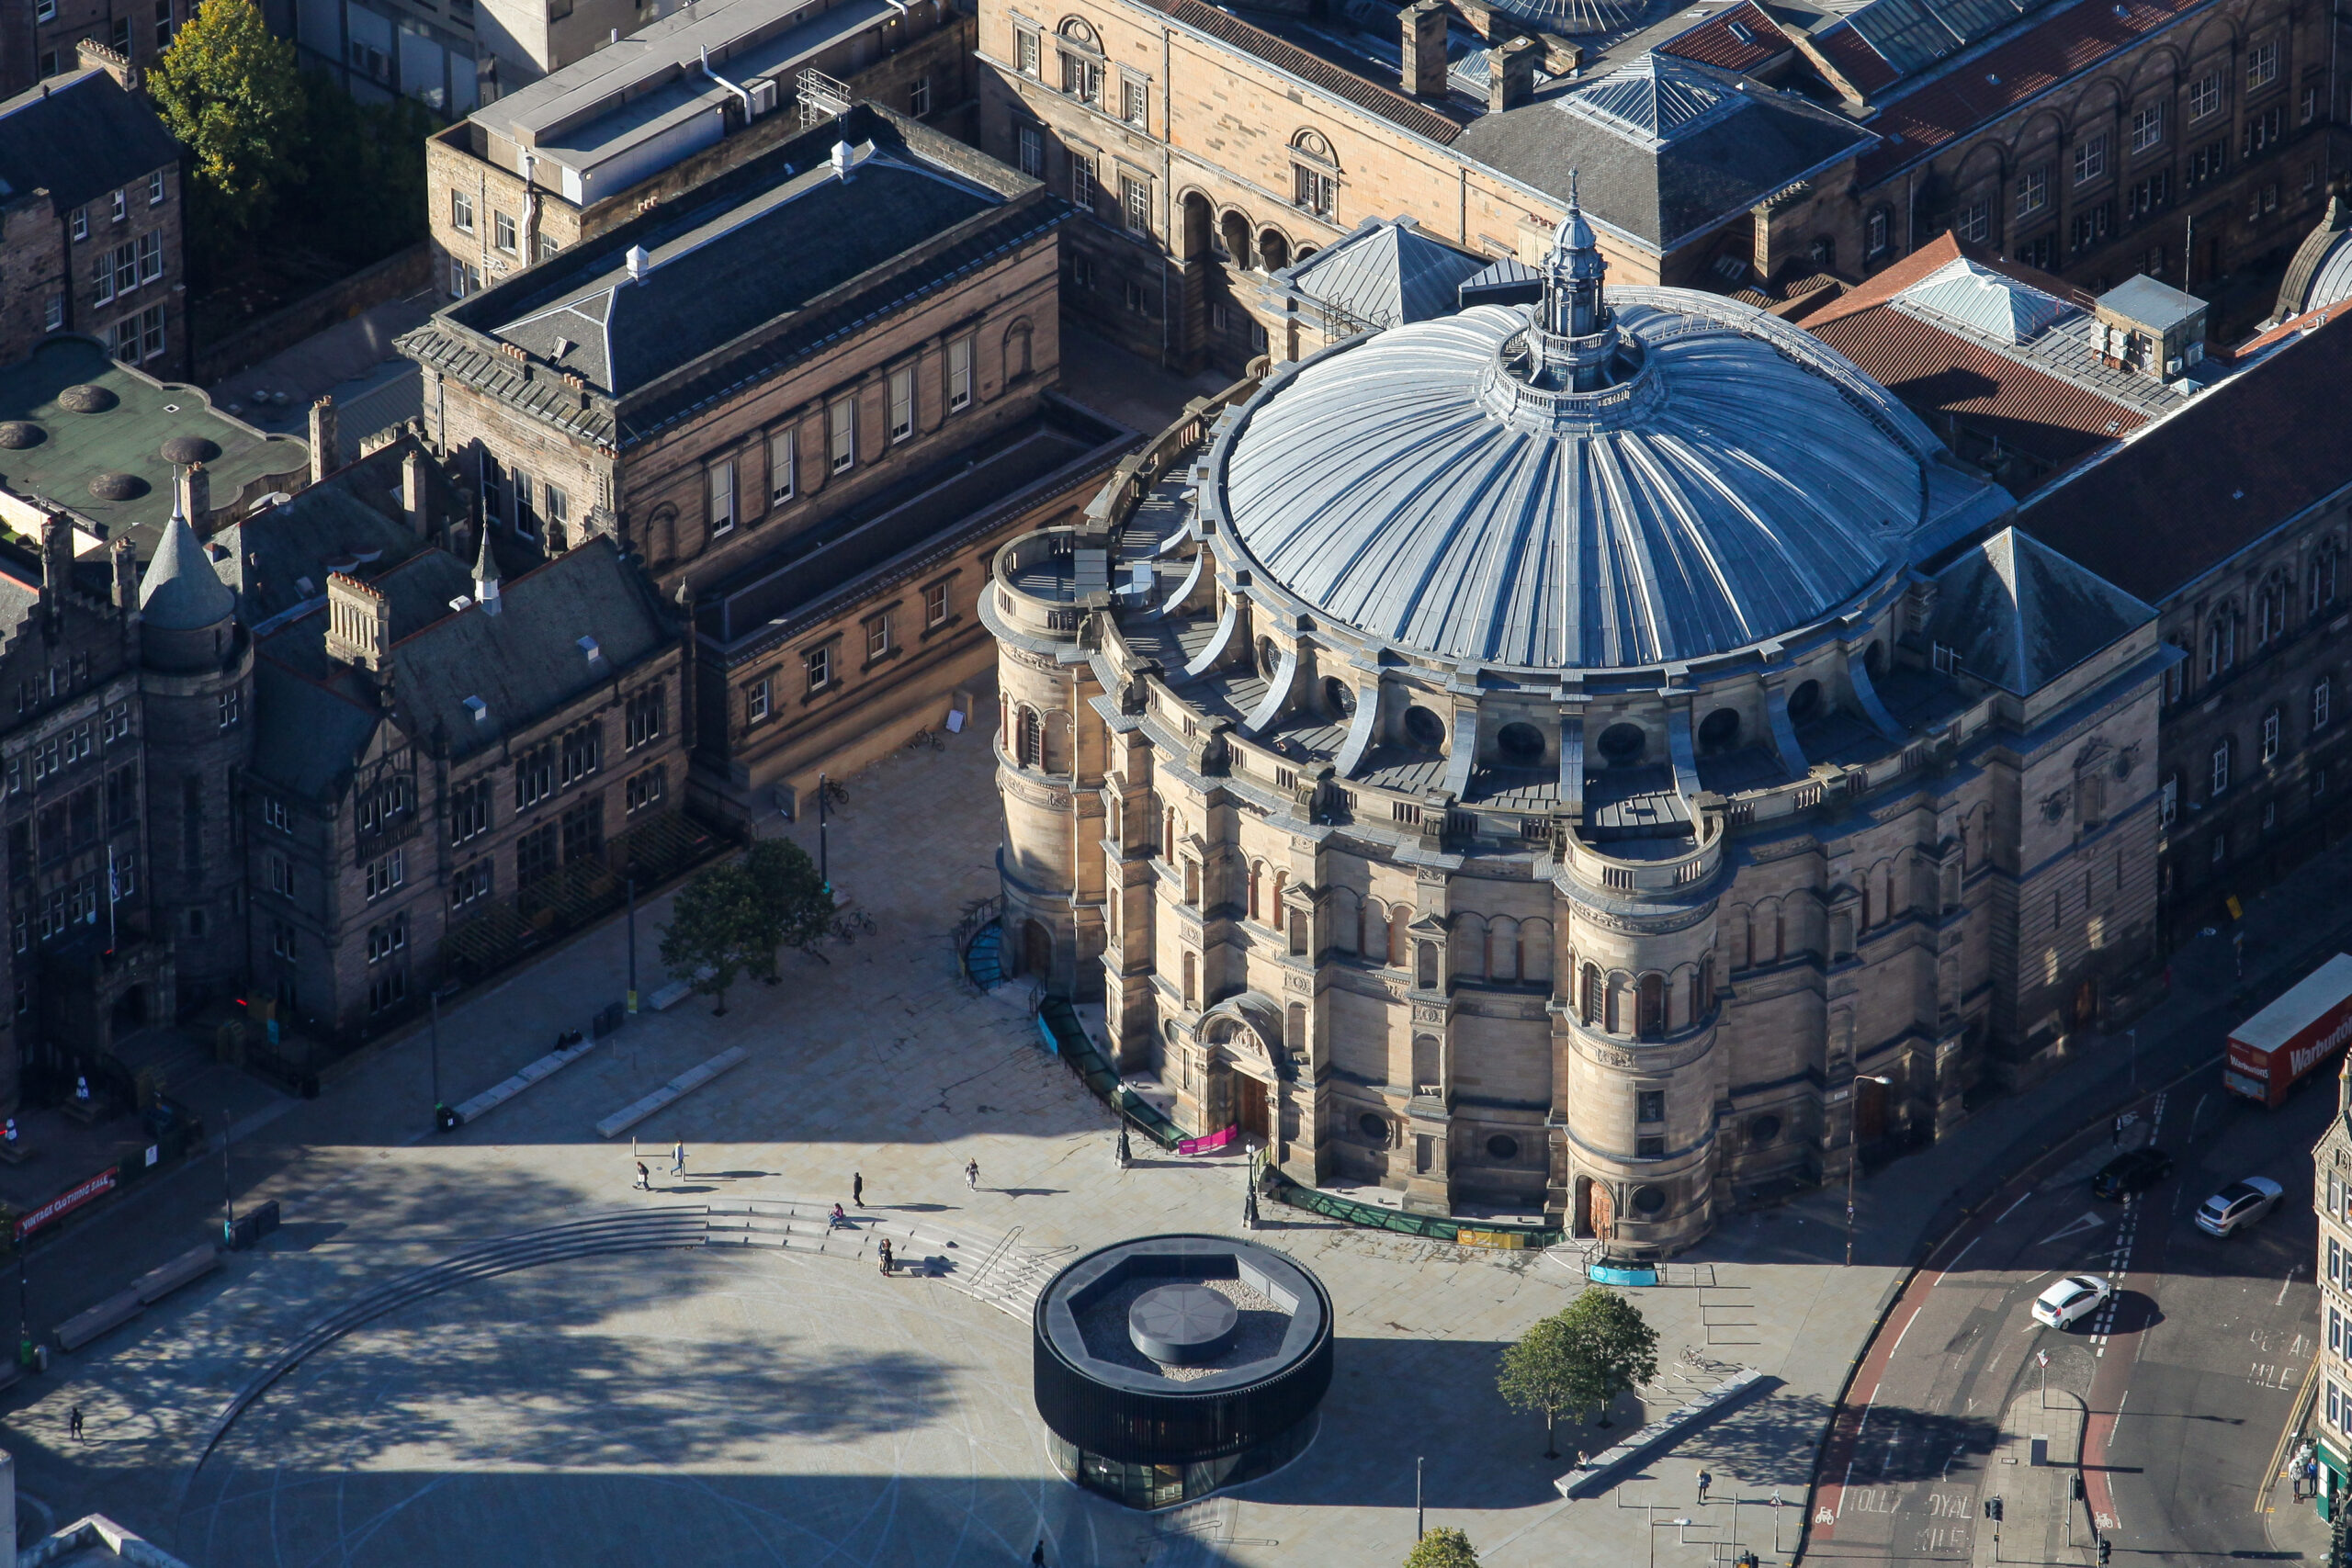 An aerial view looking down on Bristo Square and the grand McEwan Hall